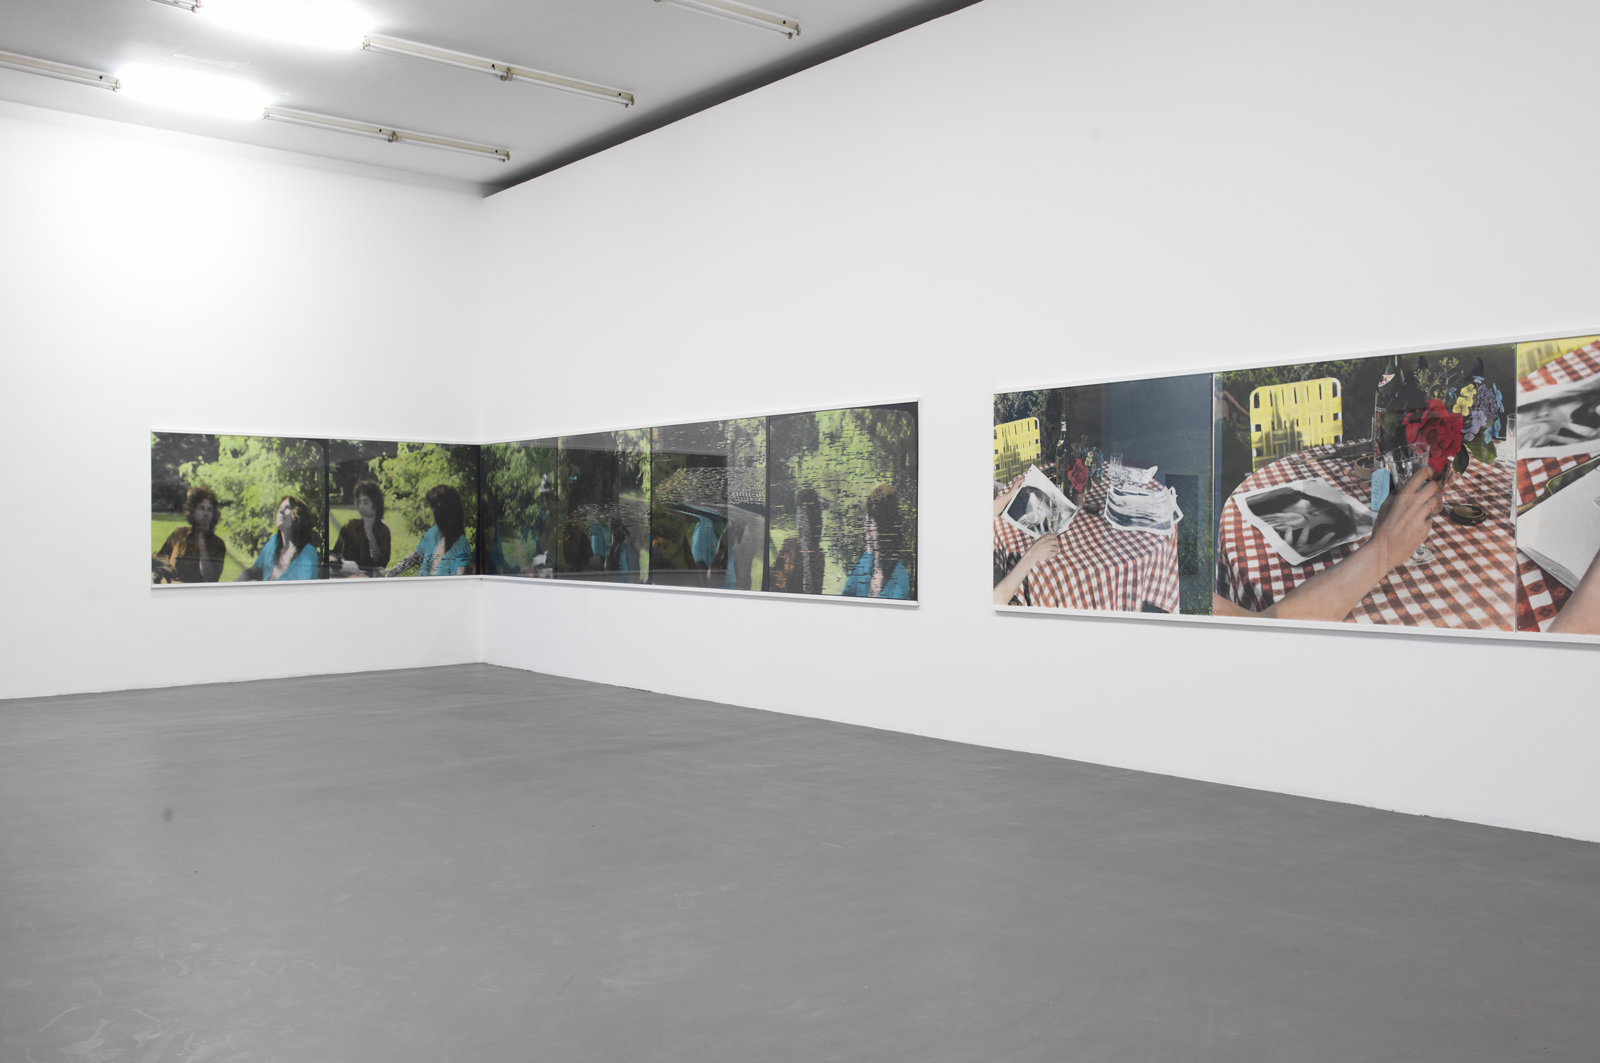 Ian Wallace, The Summer Script I &amp; II, 1974, silver prints, oil, plexiglas on paper, 12 panels, each 47 x 69 in. (119 x 176 cm). Installation view, A Literature of Images, Witte de With, Rotterdam, 2008